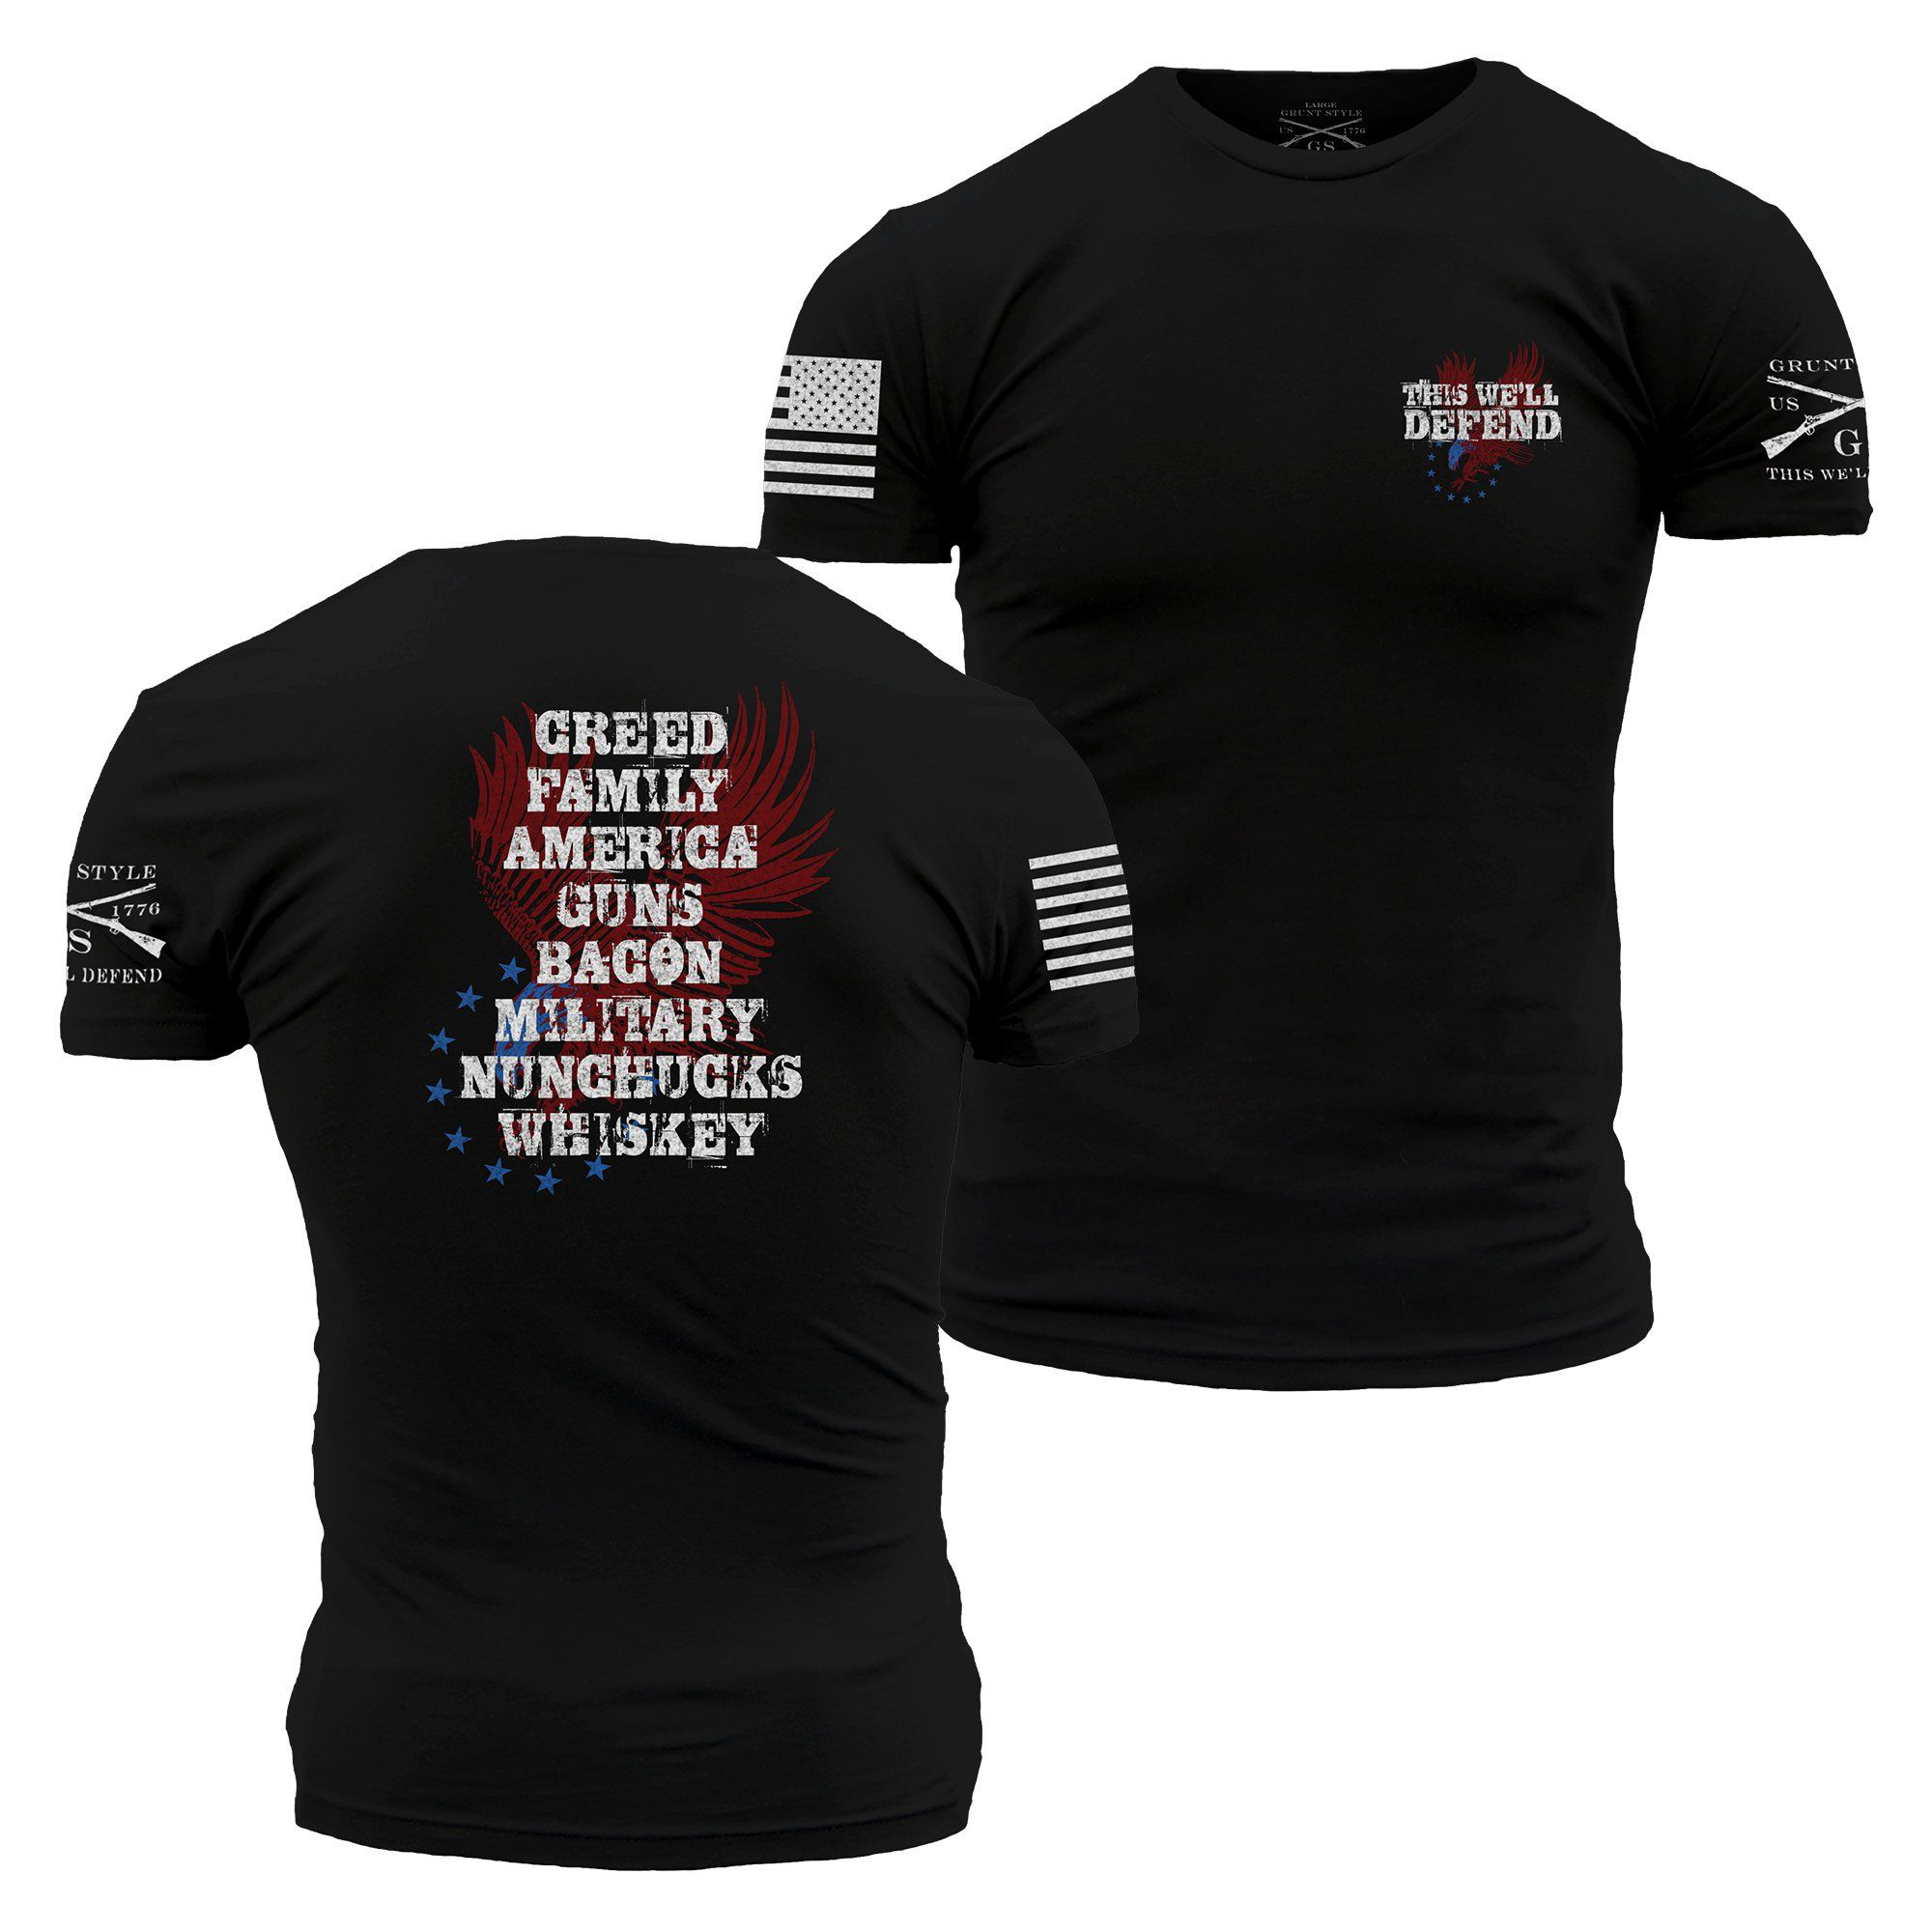 Grunt Style Creed T-Shirt - Black S